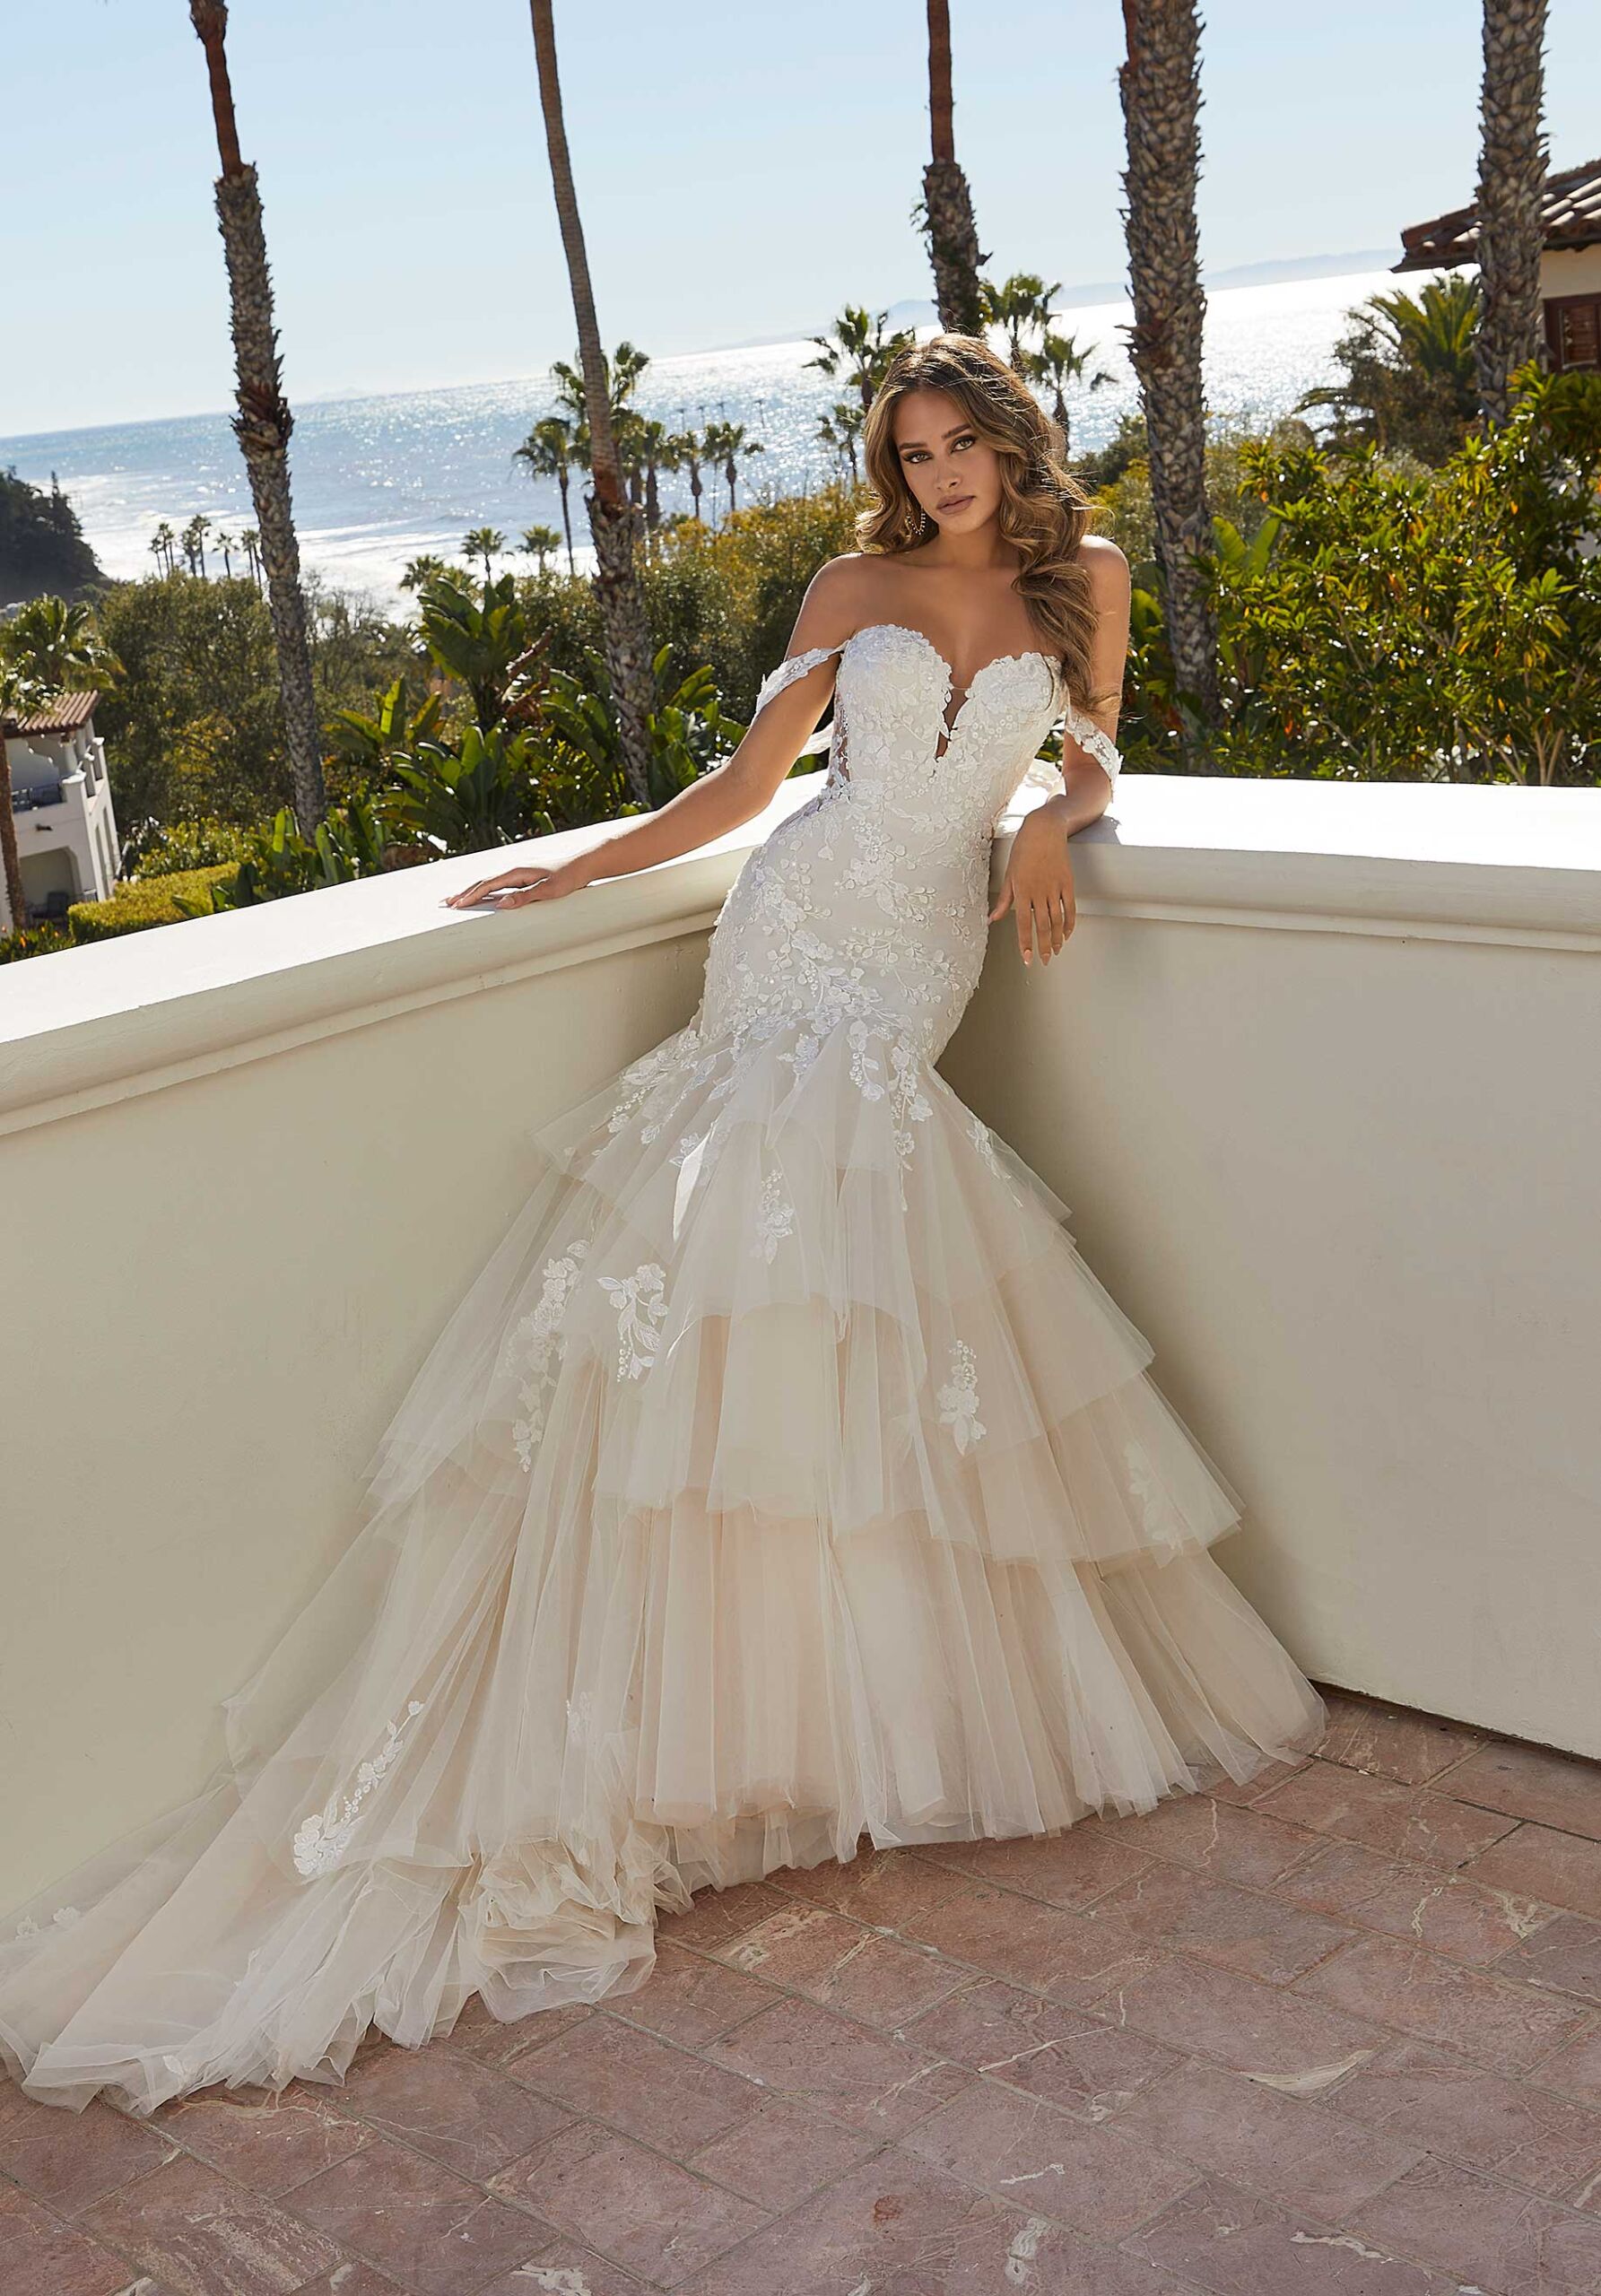 Wedding Dresses for Flat Chest: 10 Must Have Styles - Petite